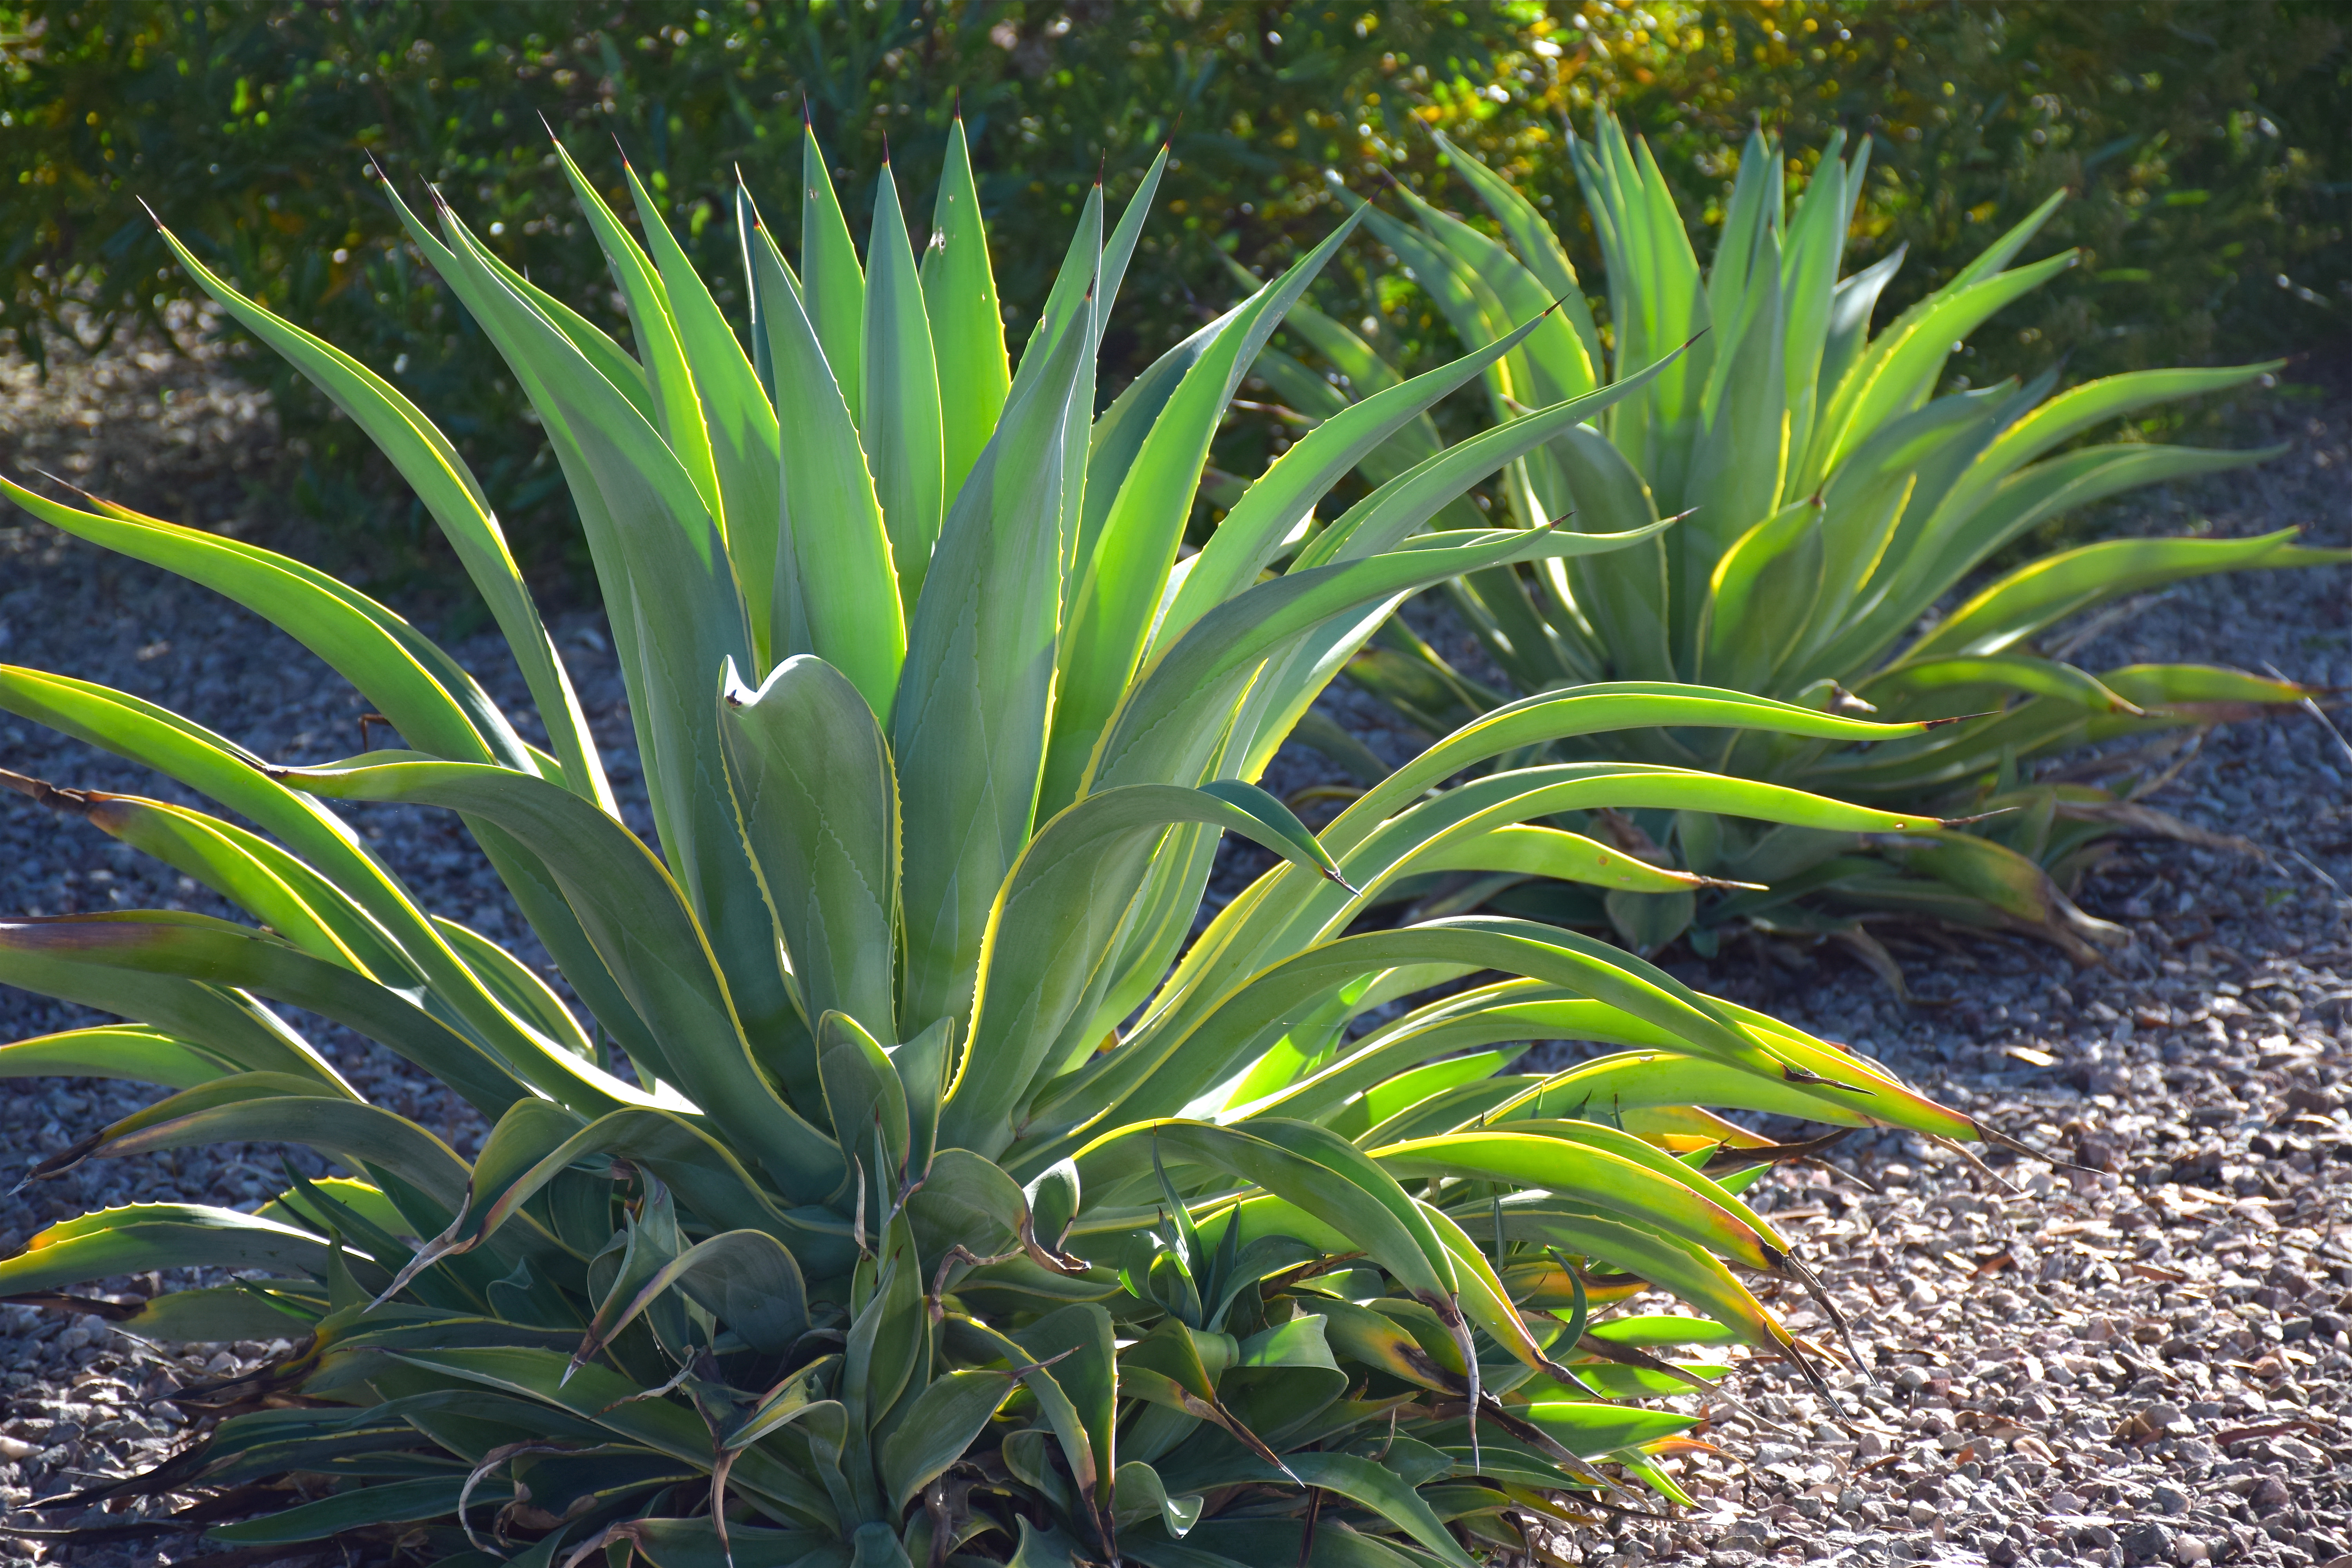 PLANT OF THE MONTH: AGAVE - Water Use It Wisely